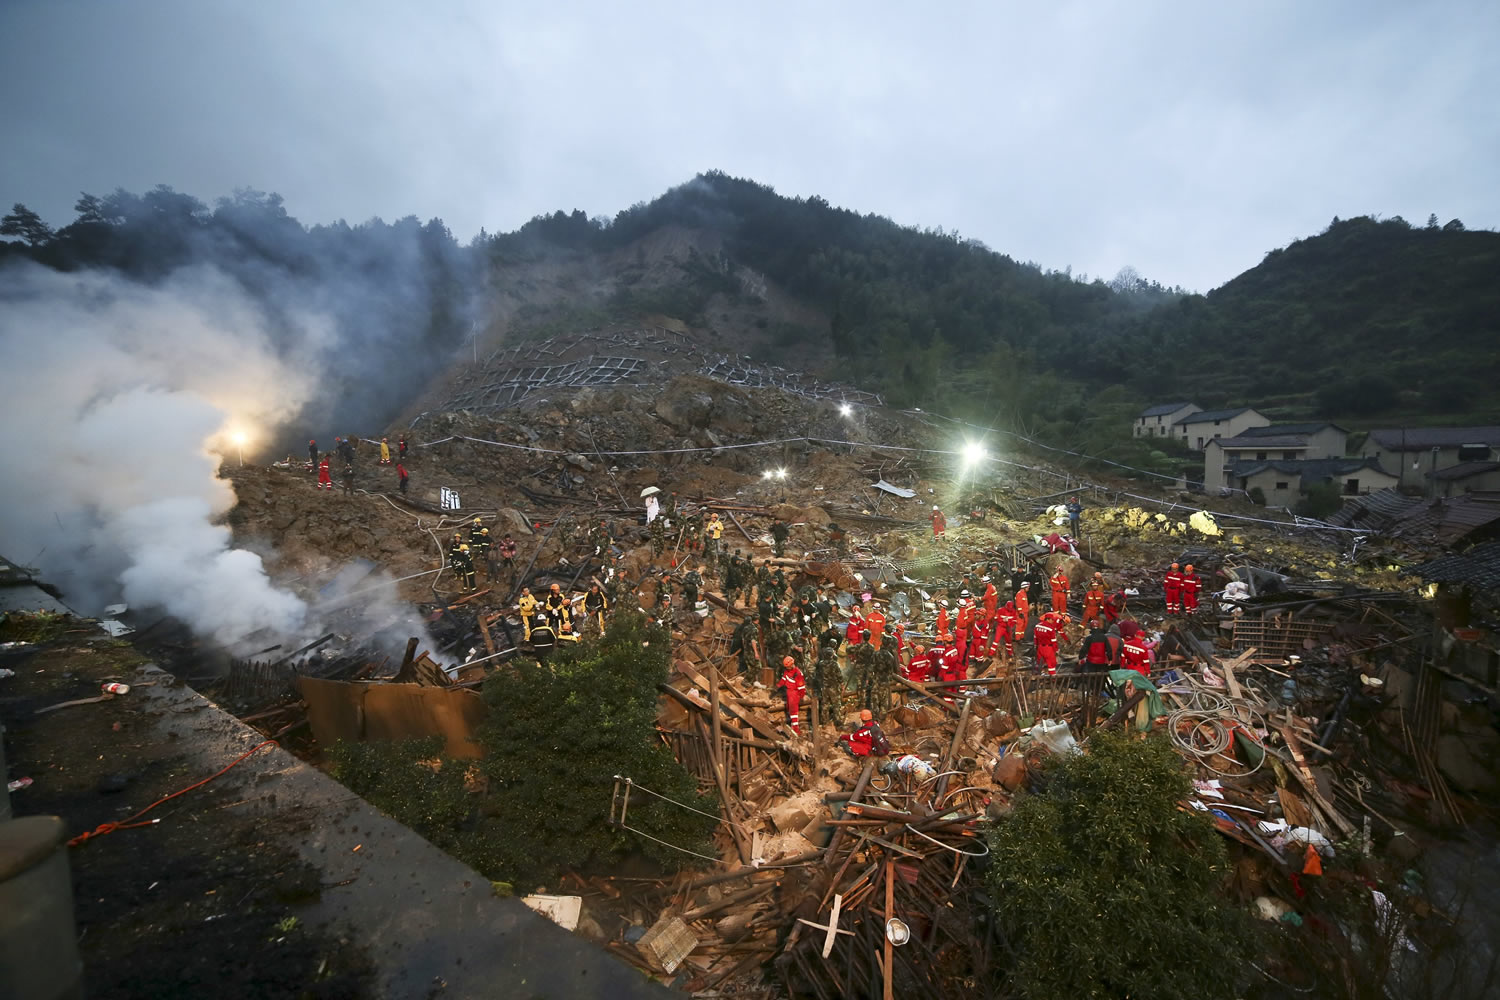 Landslide in China leaves at least 21 dead and 16 missing